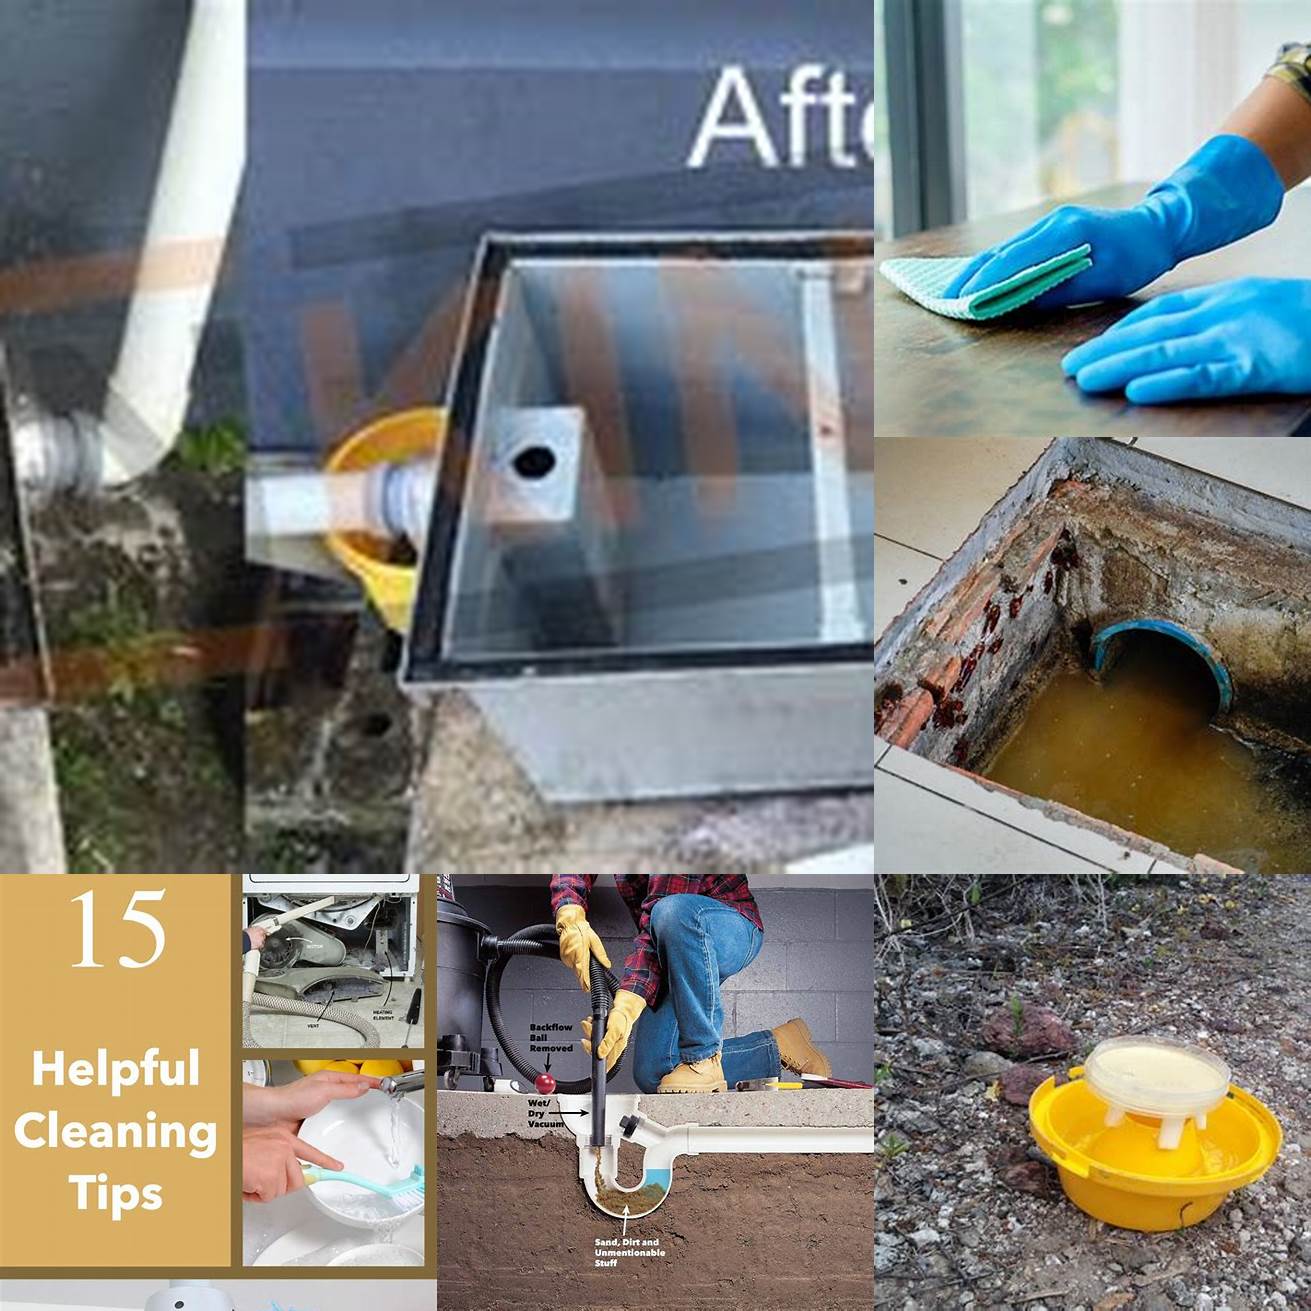 Can trap dirt and bacteria if not cleaned properly